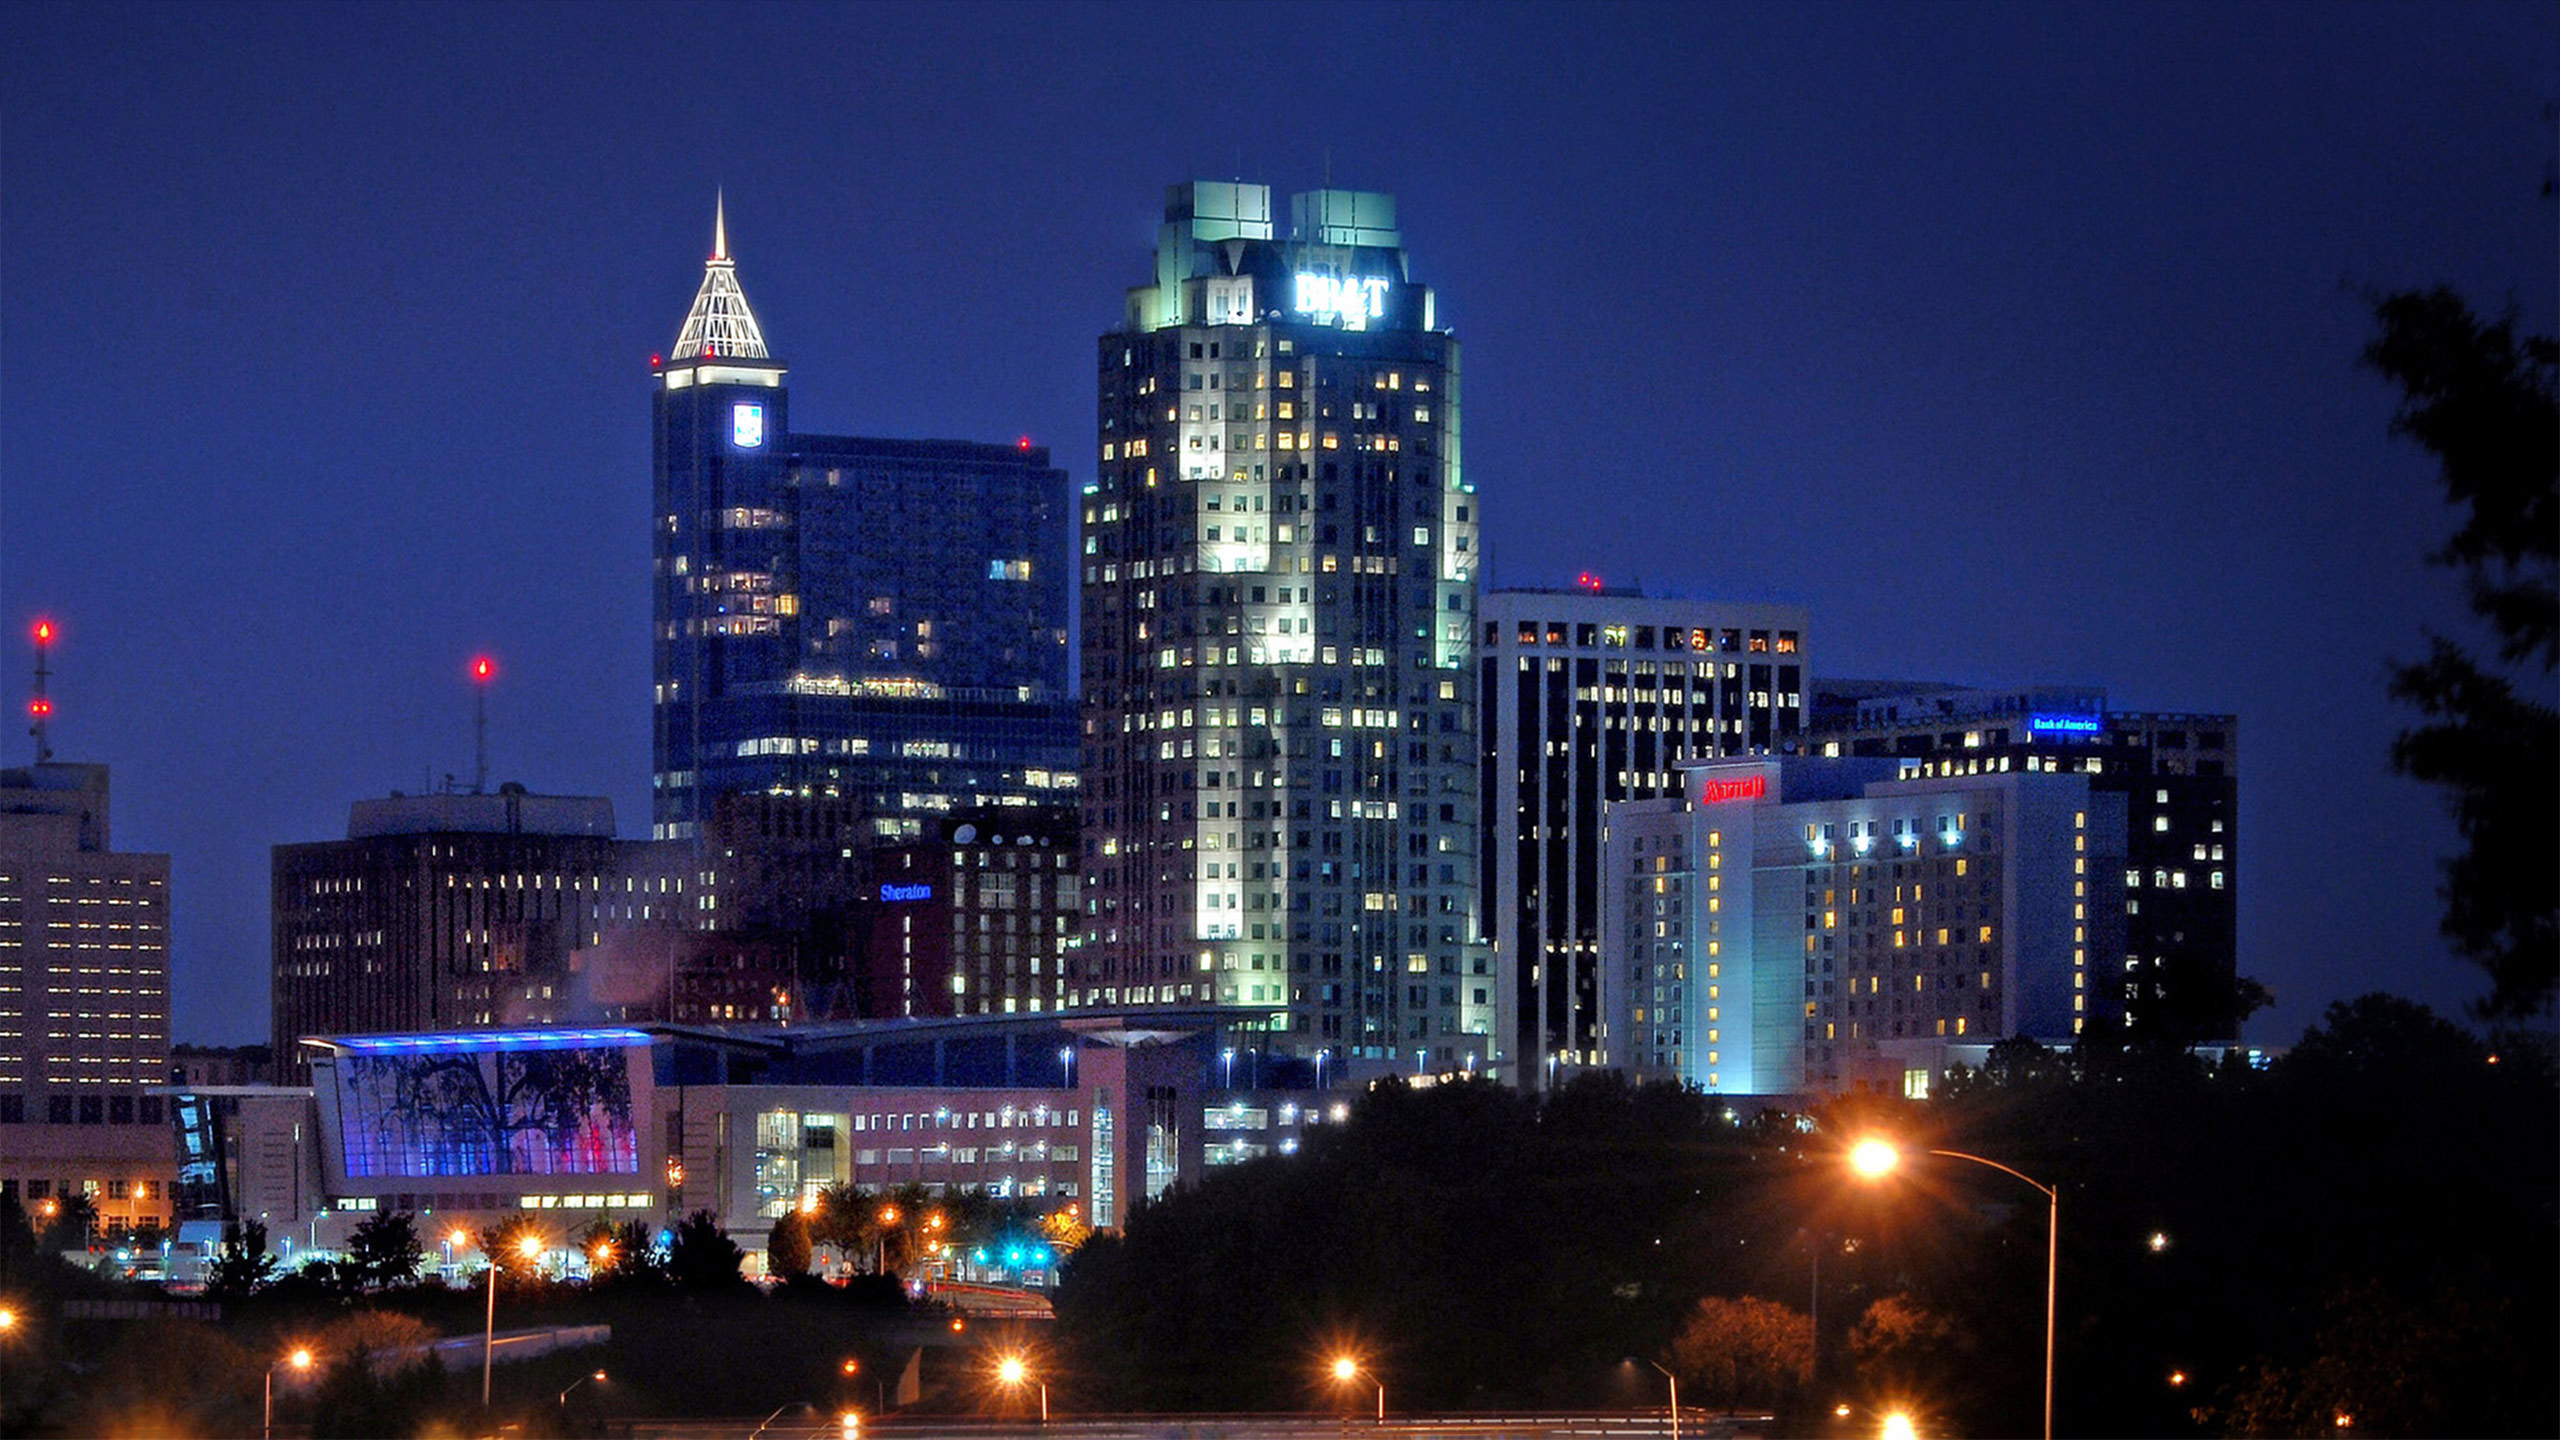 A cityscape of downtown Raleigh at night